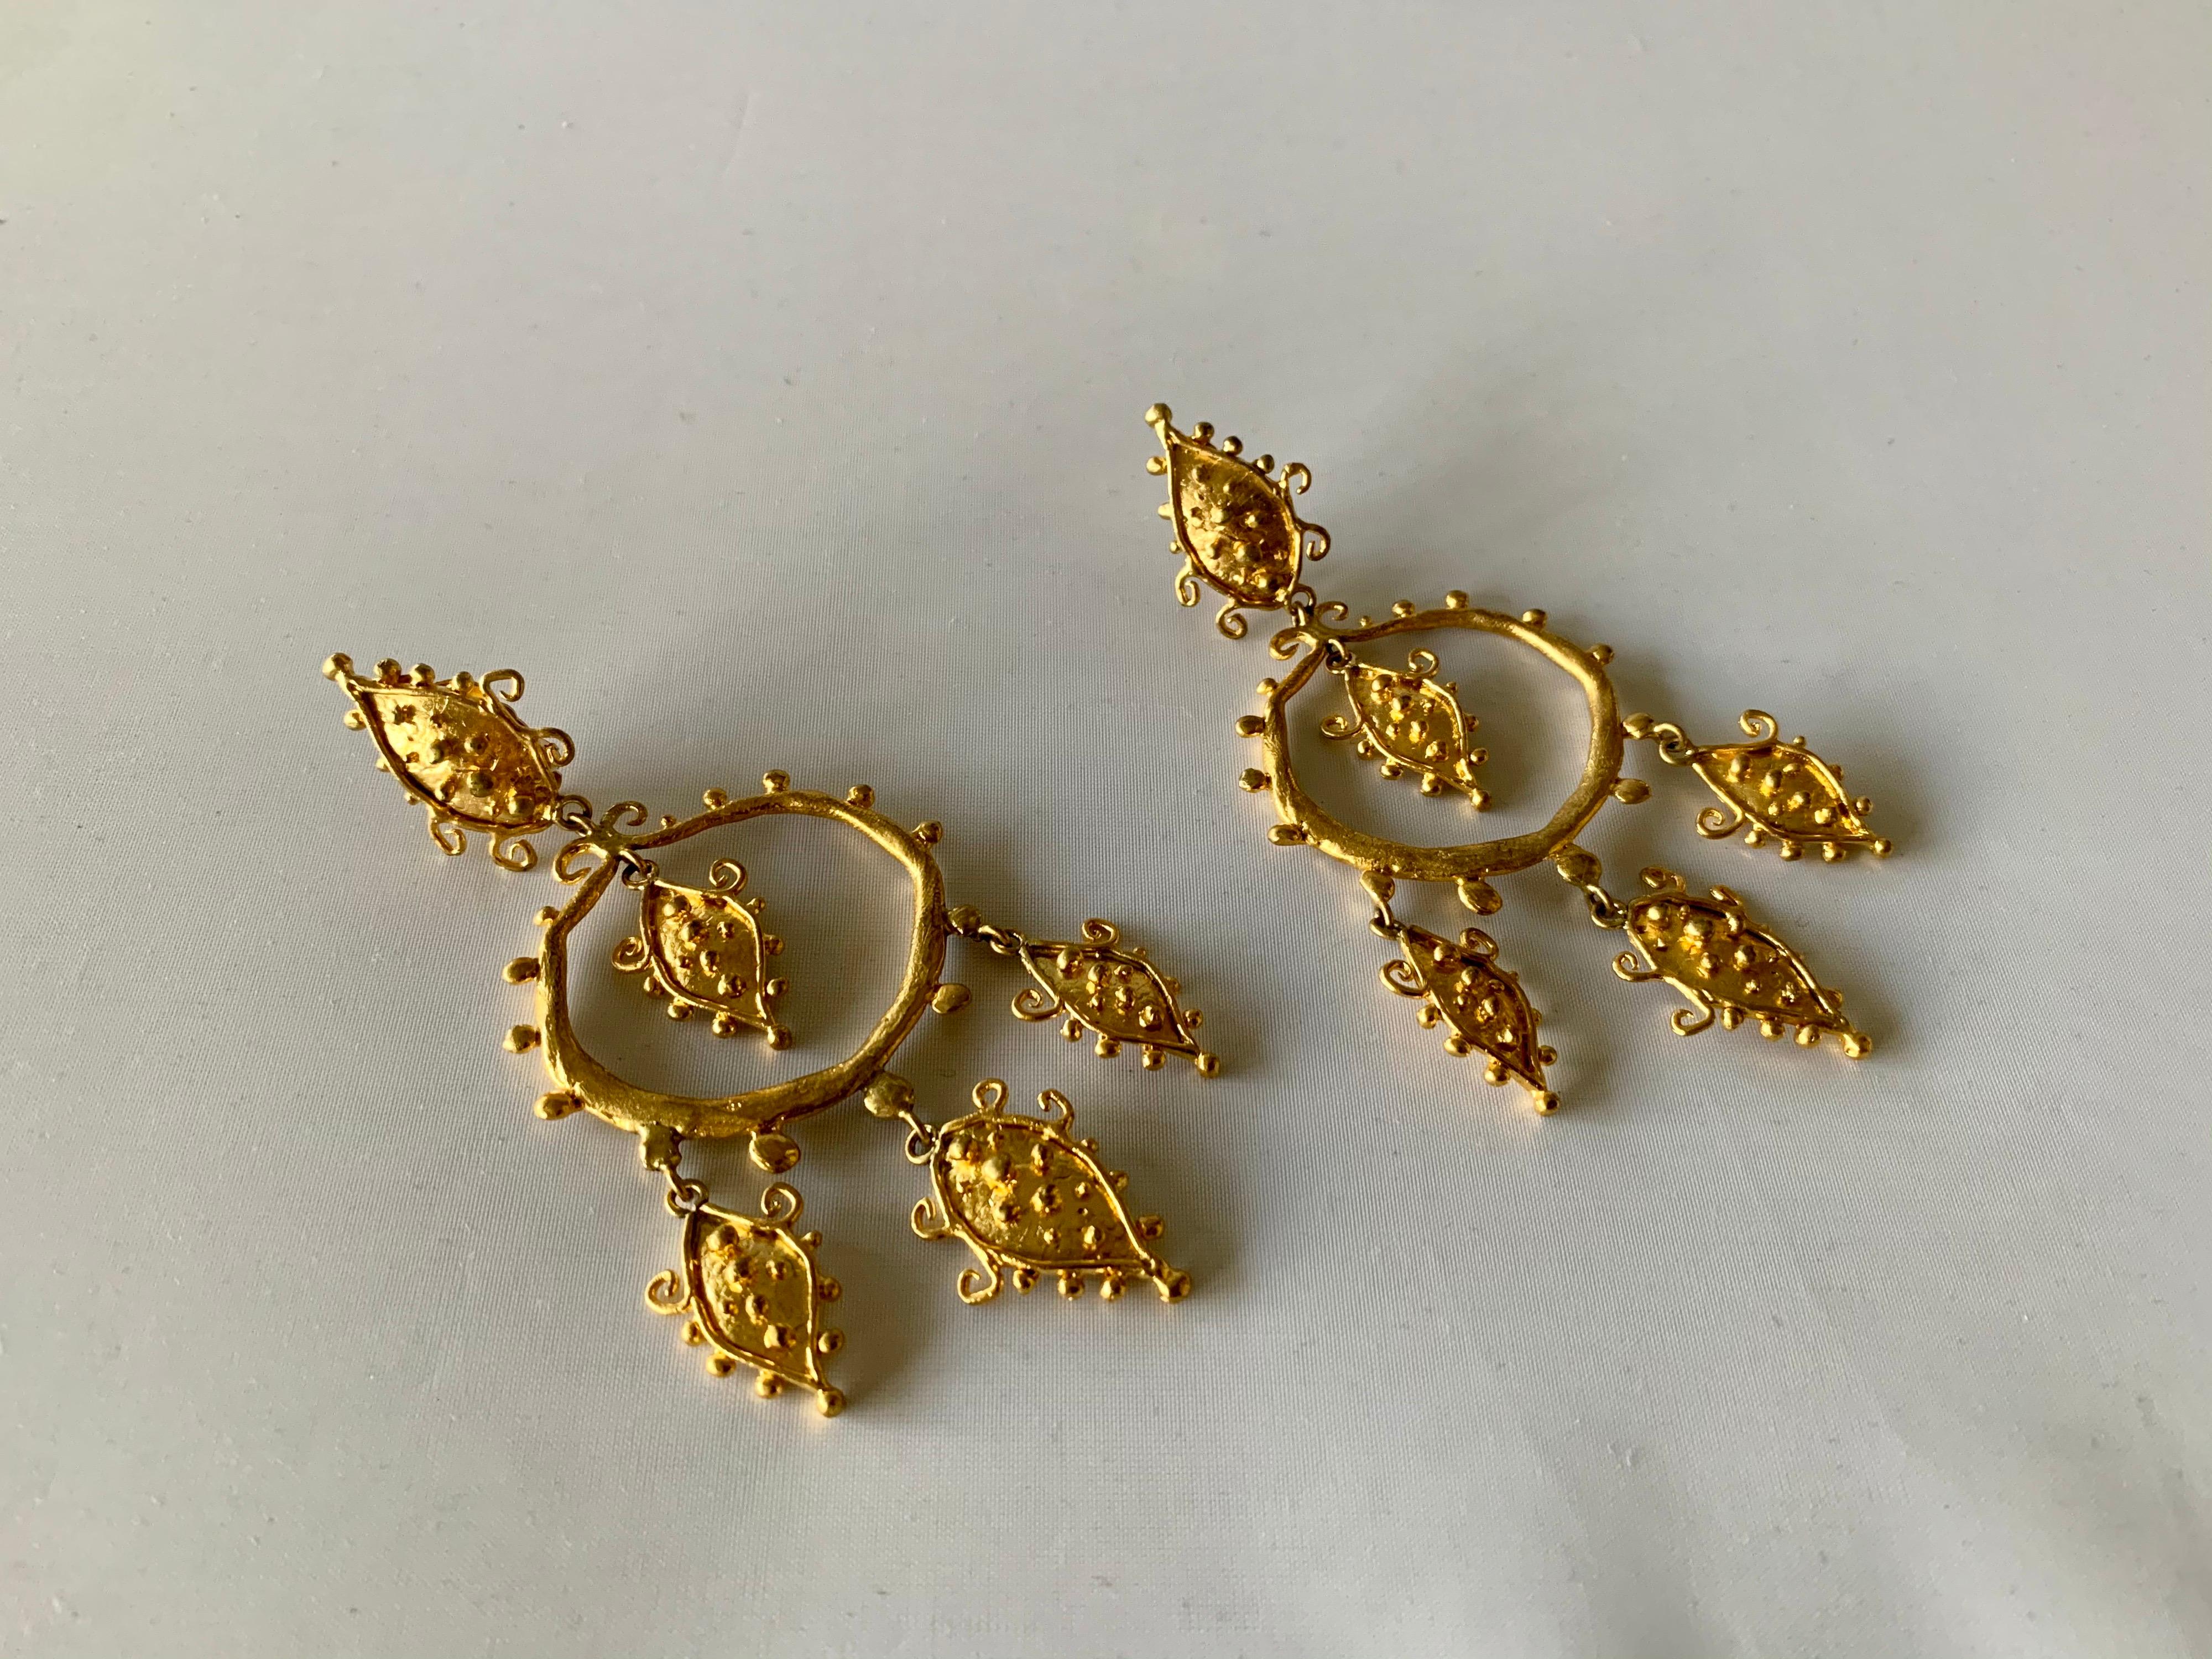 Contemporary Whimsical Gold Statement Earrings by Herve Van Der Straeten